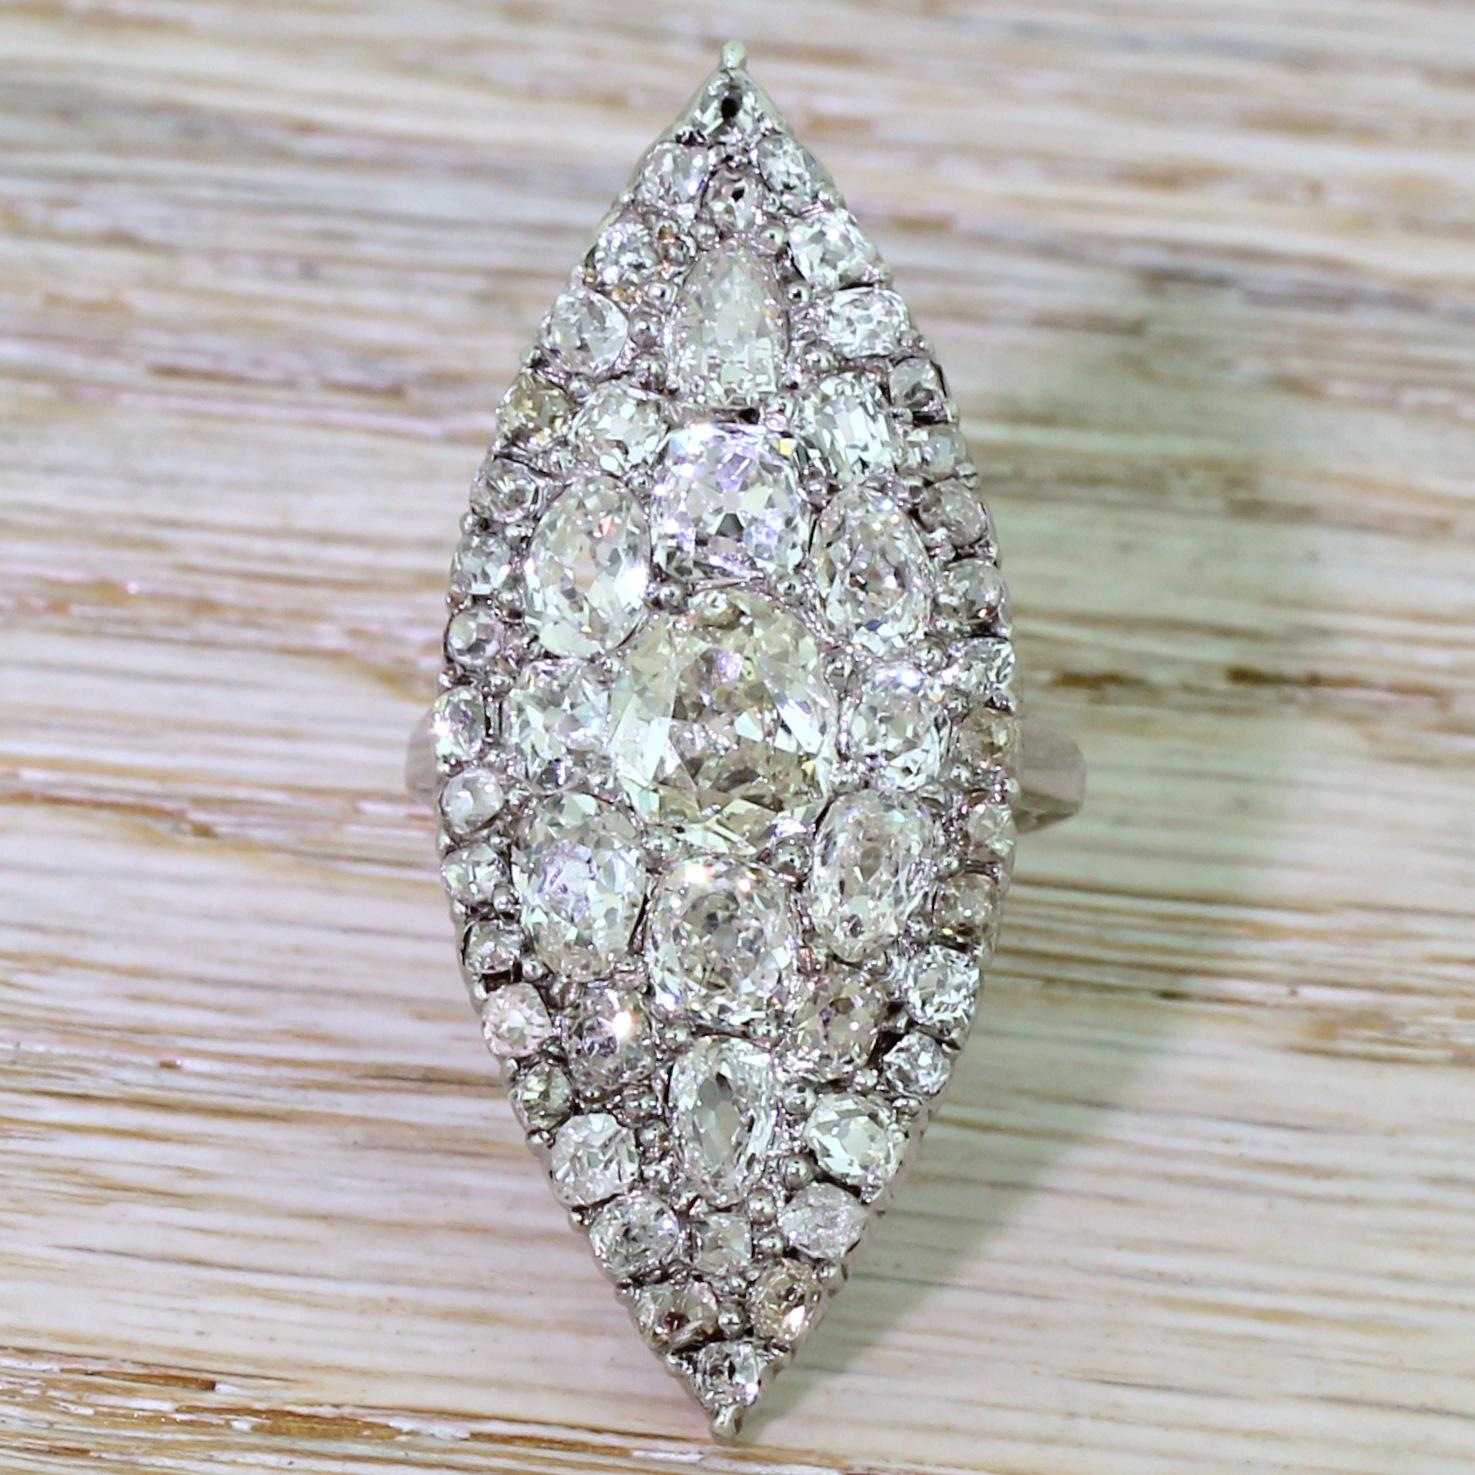 Overstated, unsubtle, brash – but oh my do we approve! Pieced together like a jigsaw, this gloriously decadent navette cluster features fifty one old cut diamonds of varying cuts and sizes to form a finger full of bling. The diamonds are bead and